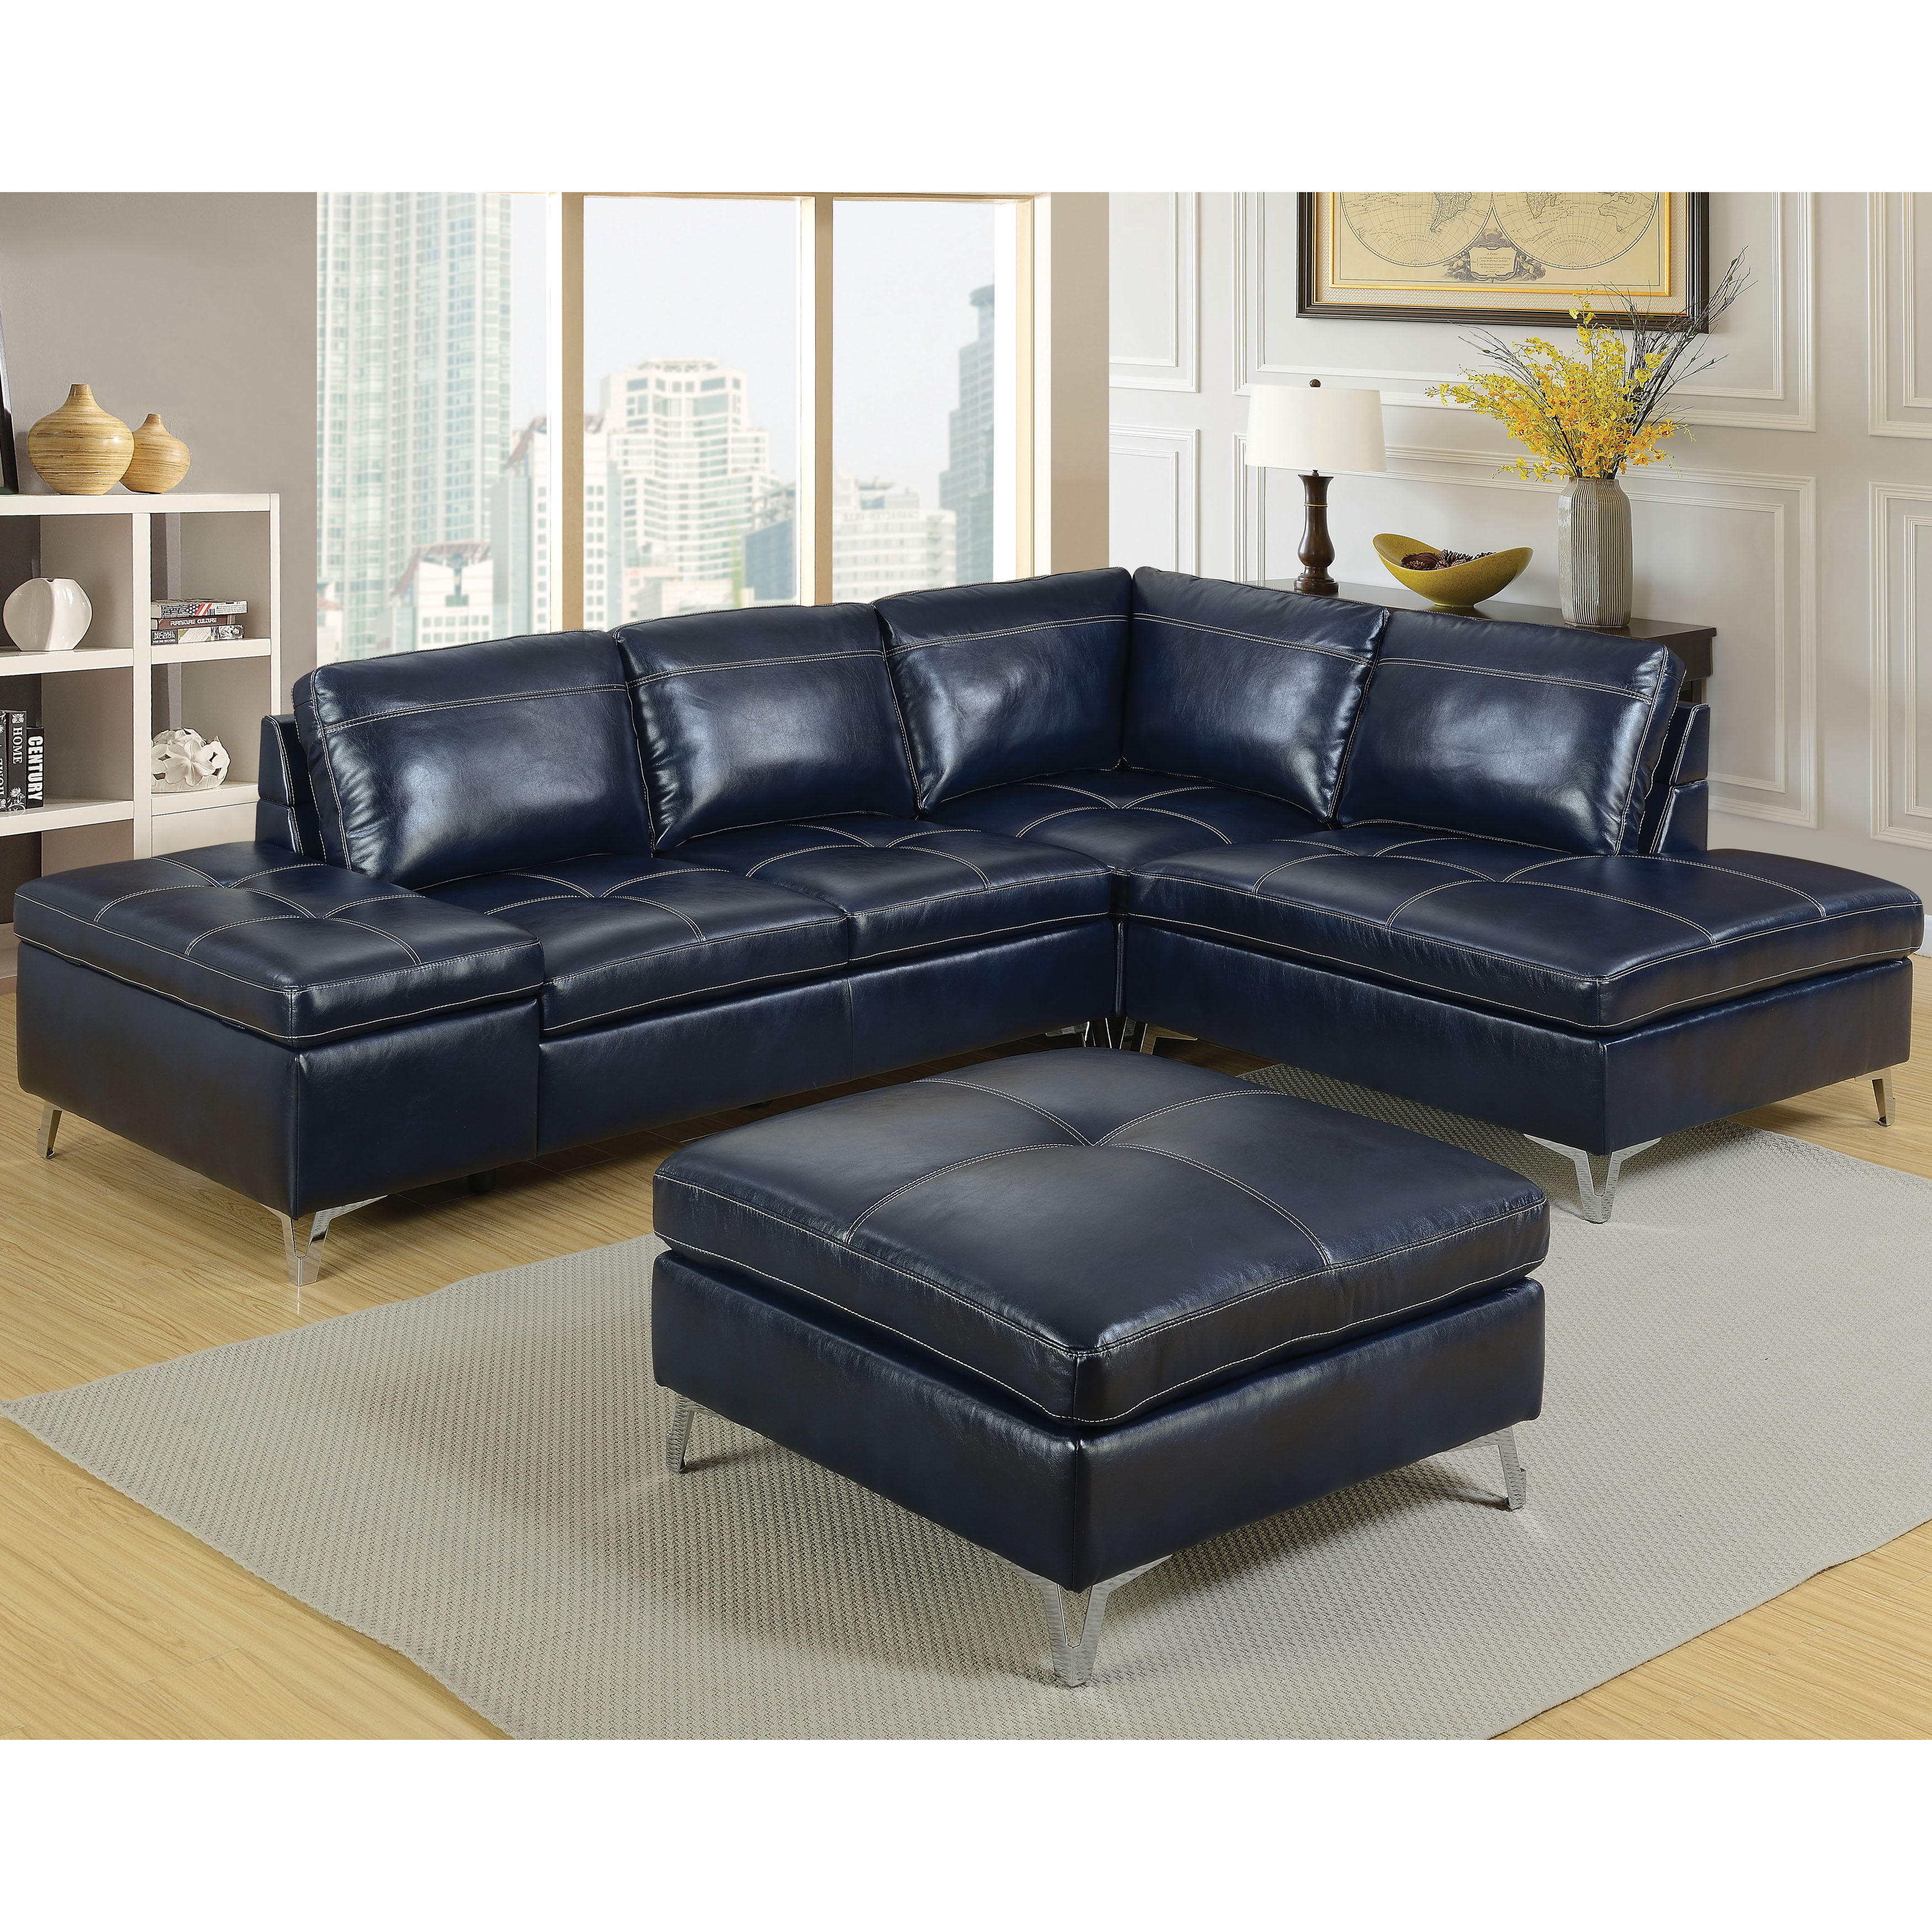 Furniture of America Brandon Modern Leather Sectional Sofa with Ottoman ...